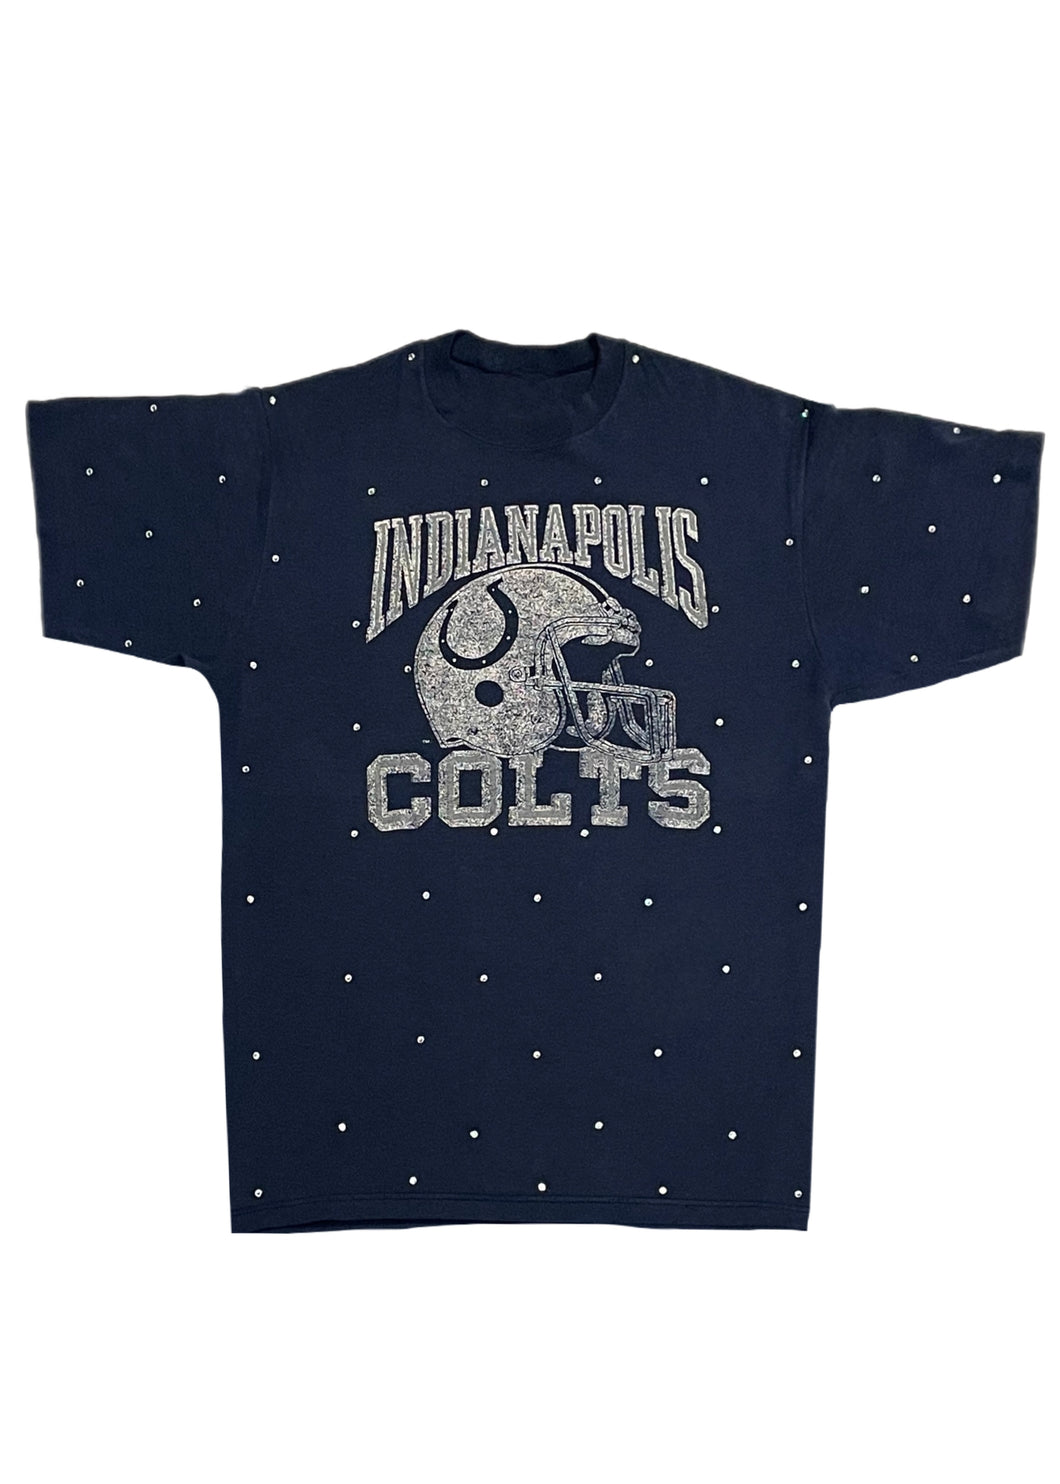 Indianapolis Colts, NFL One of a KIND Vintage Tee Shirt with All Over Crystal Design